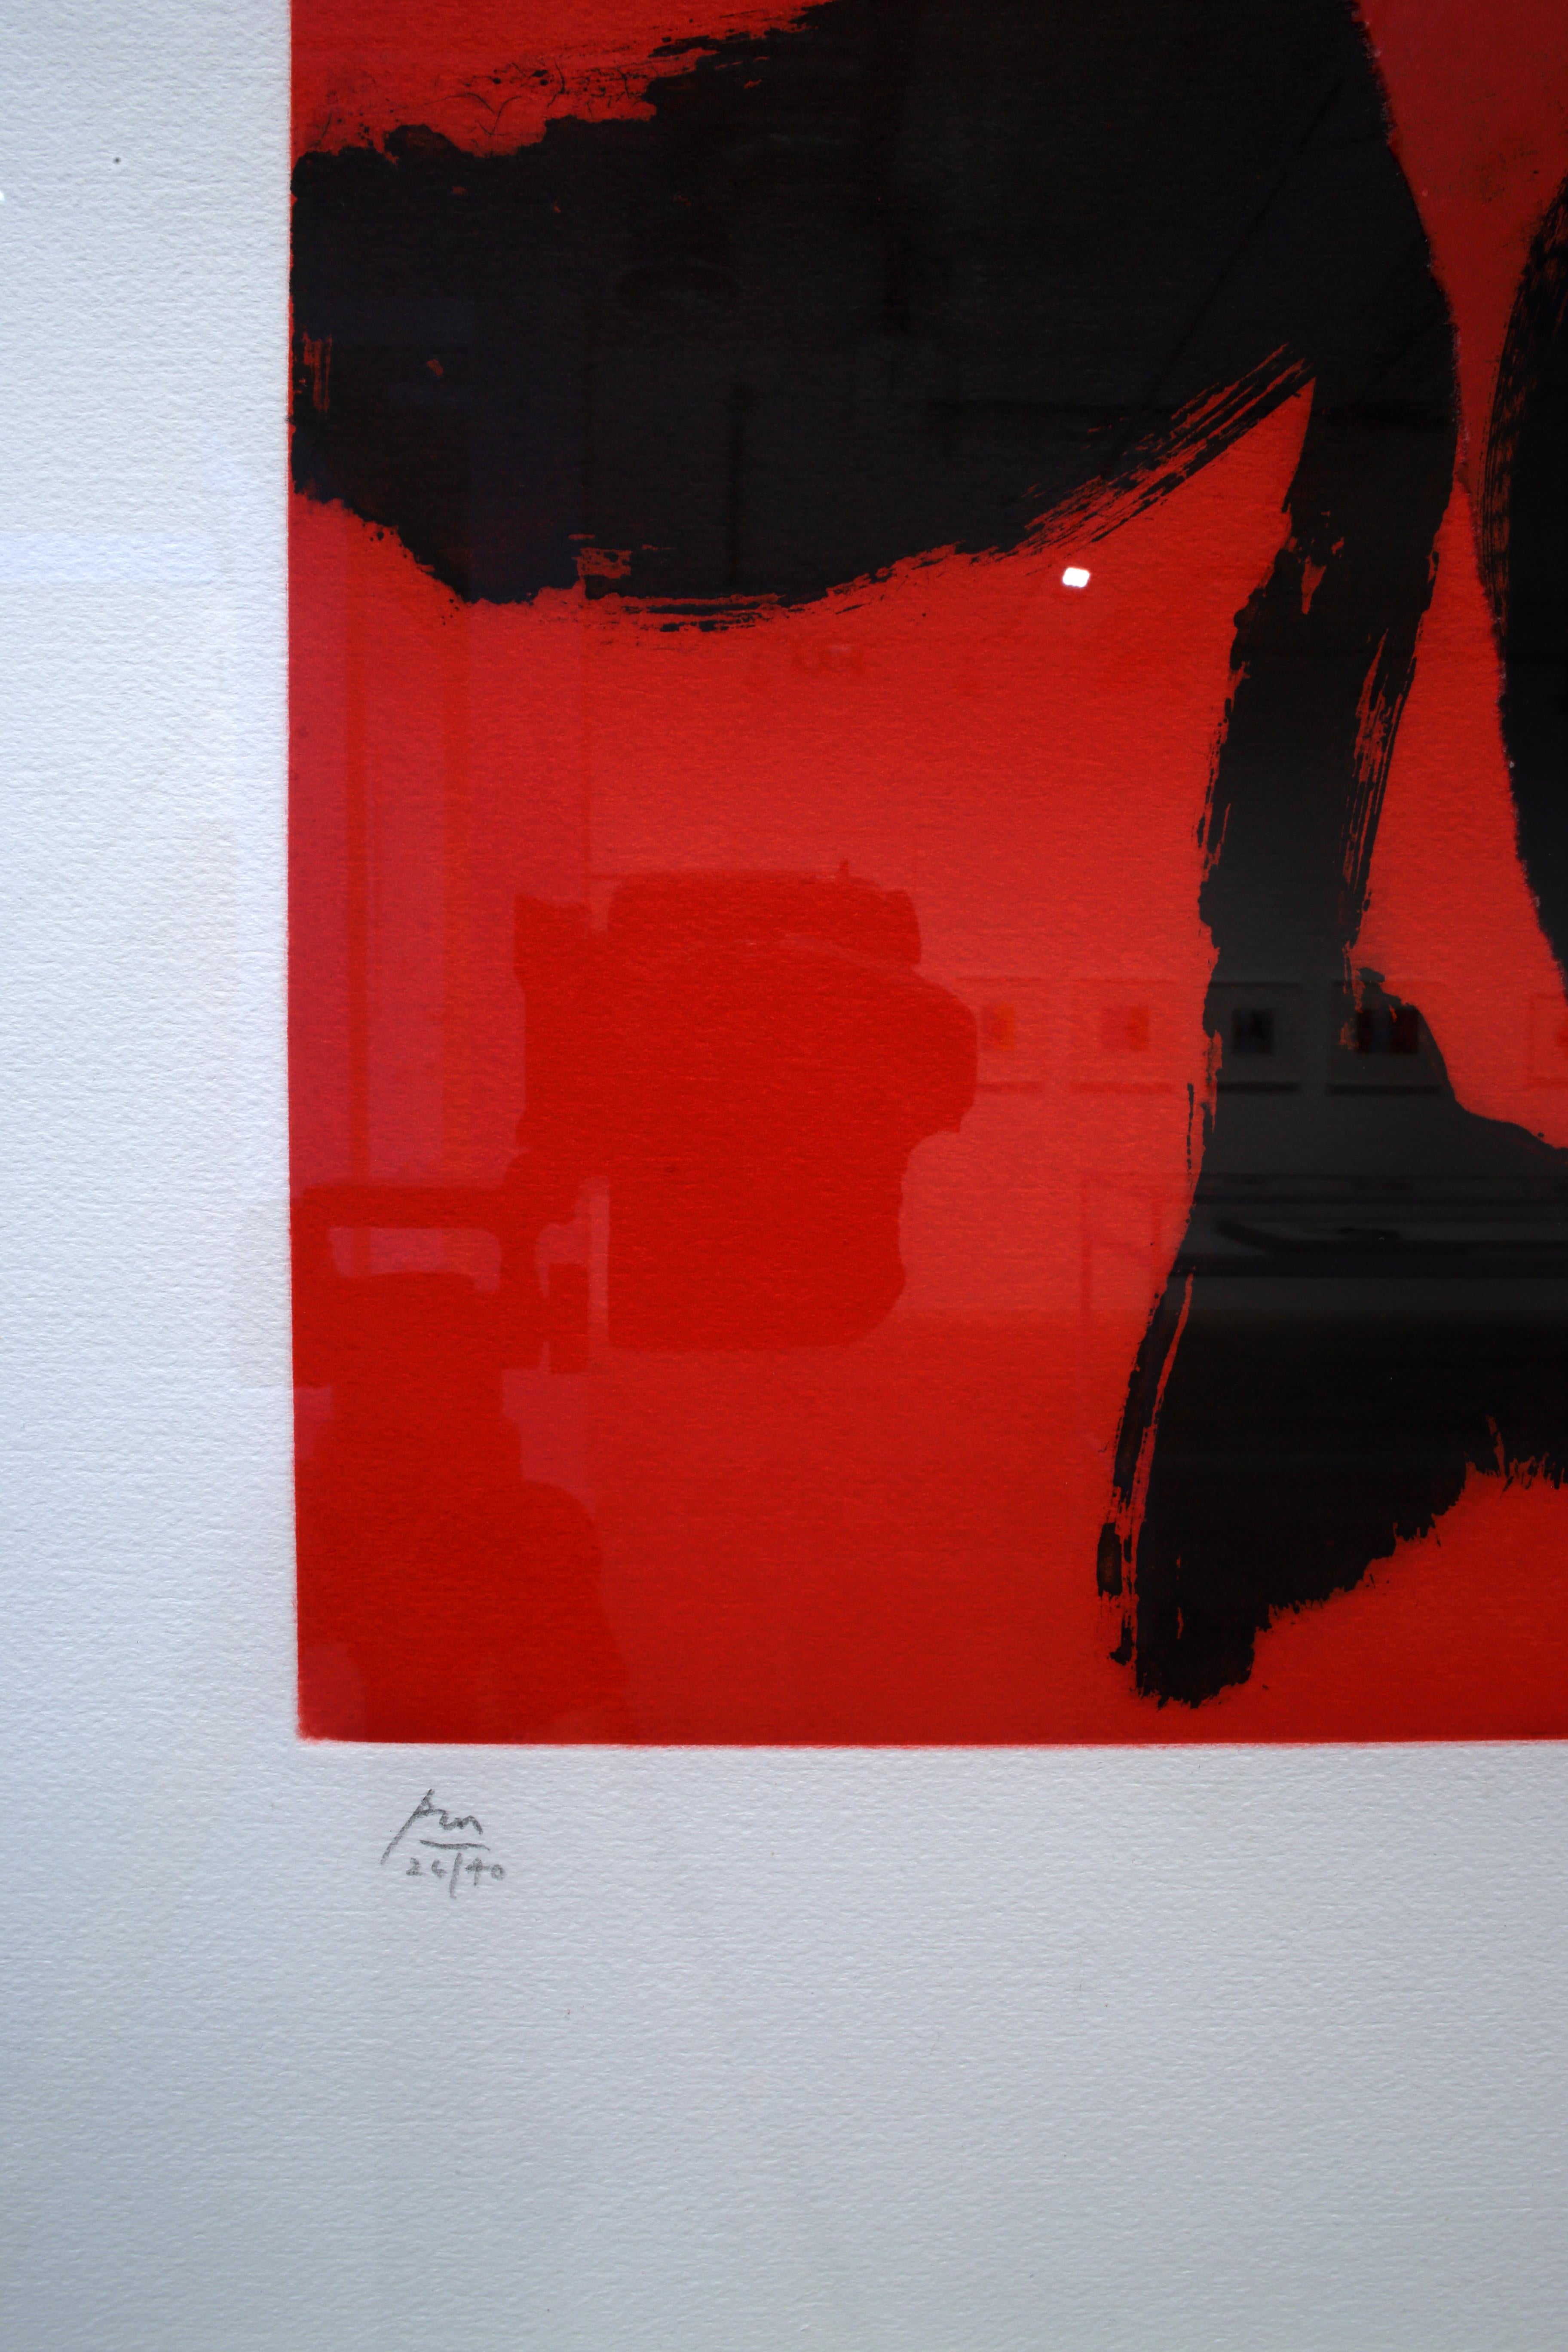 The Red Queen - Abstract Expressionist Print by Robert Motherwell